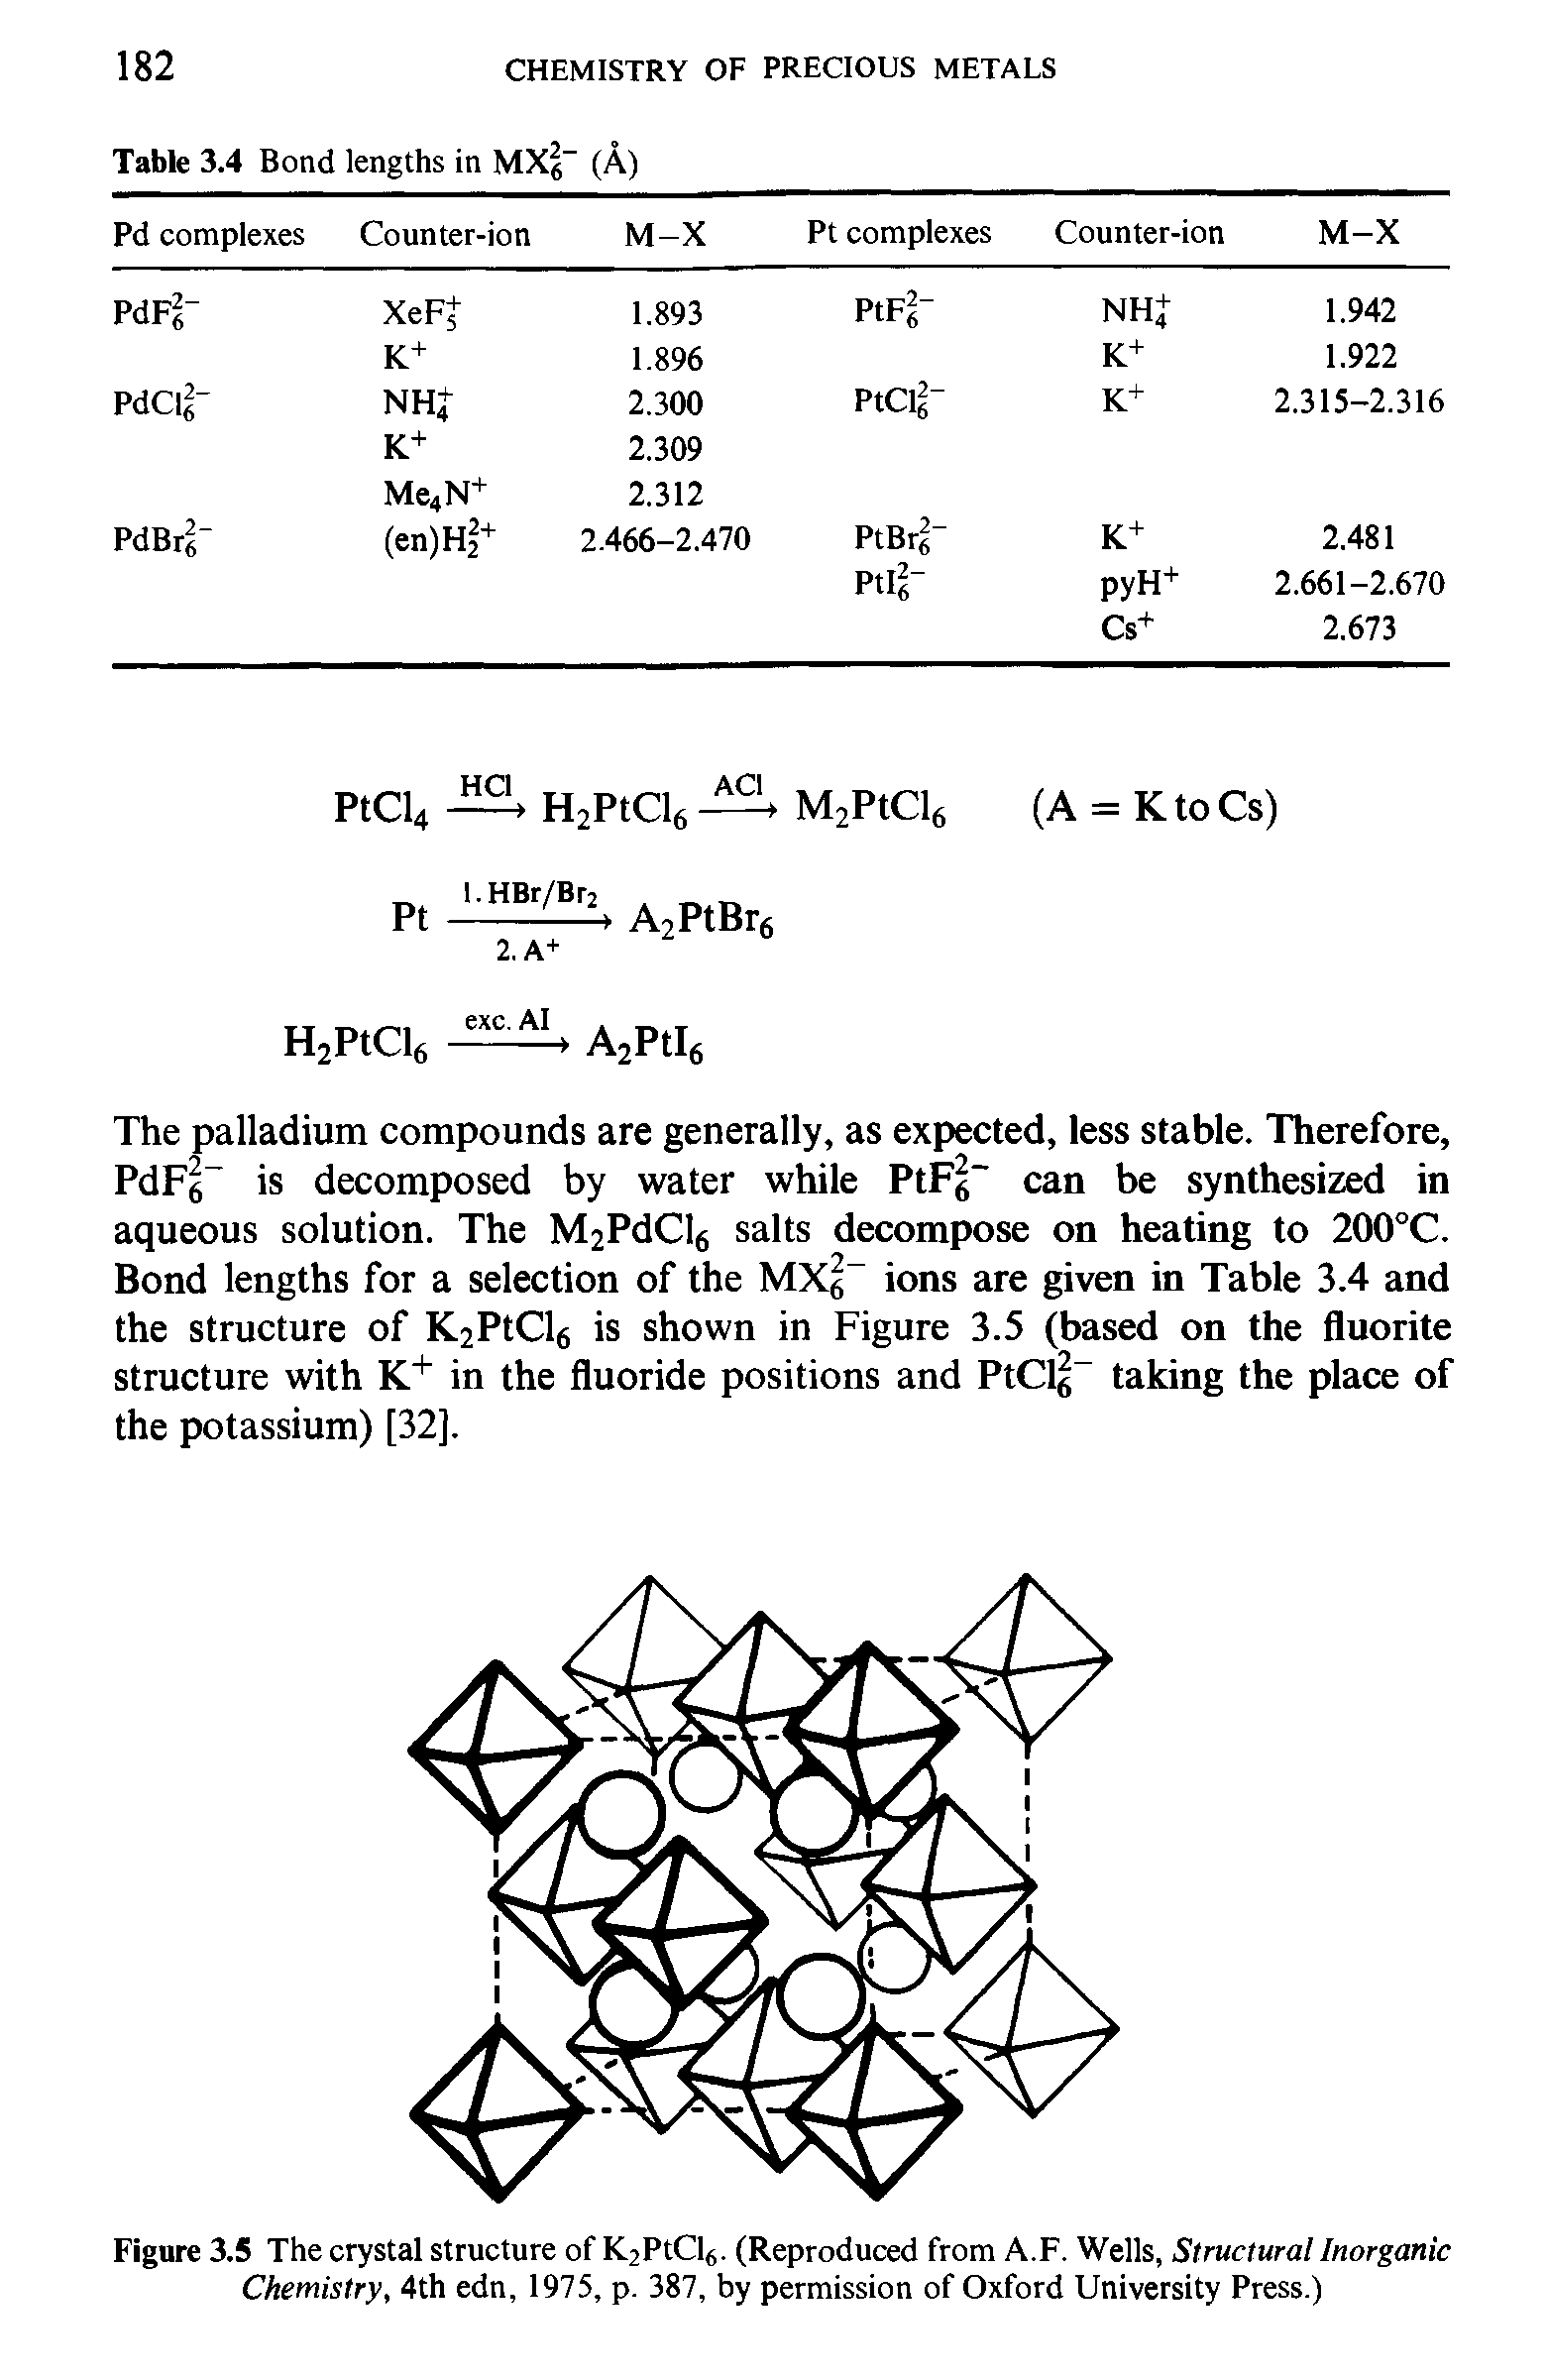 Figure 3.5 The crystal structure of K2PtCl6. (Reproduced from A.F. Wells, Structural Inorganic Chemistry, 4th edn, 1975, p. 387, by permission of Oxford University Press.)...